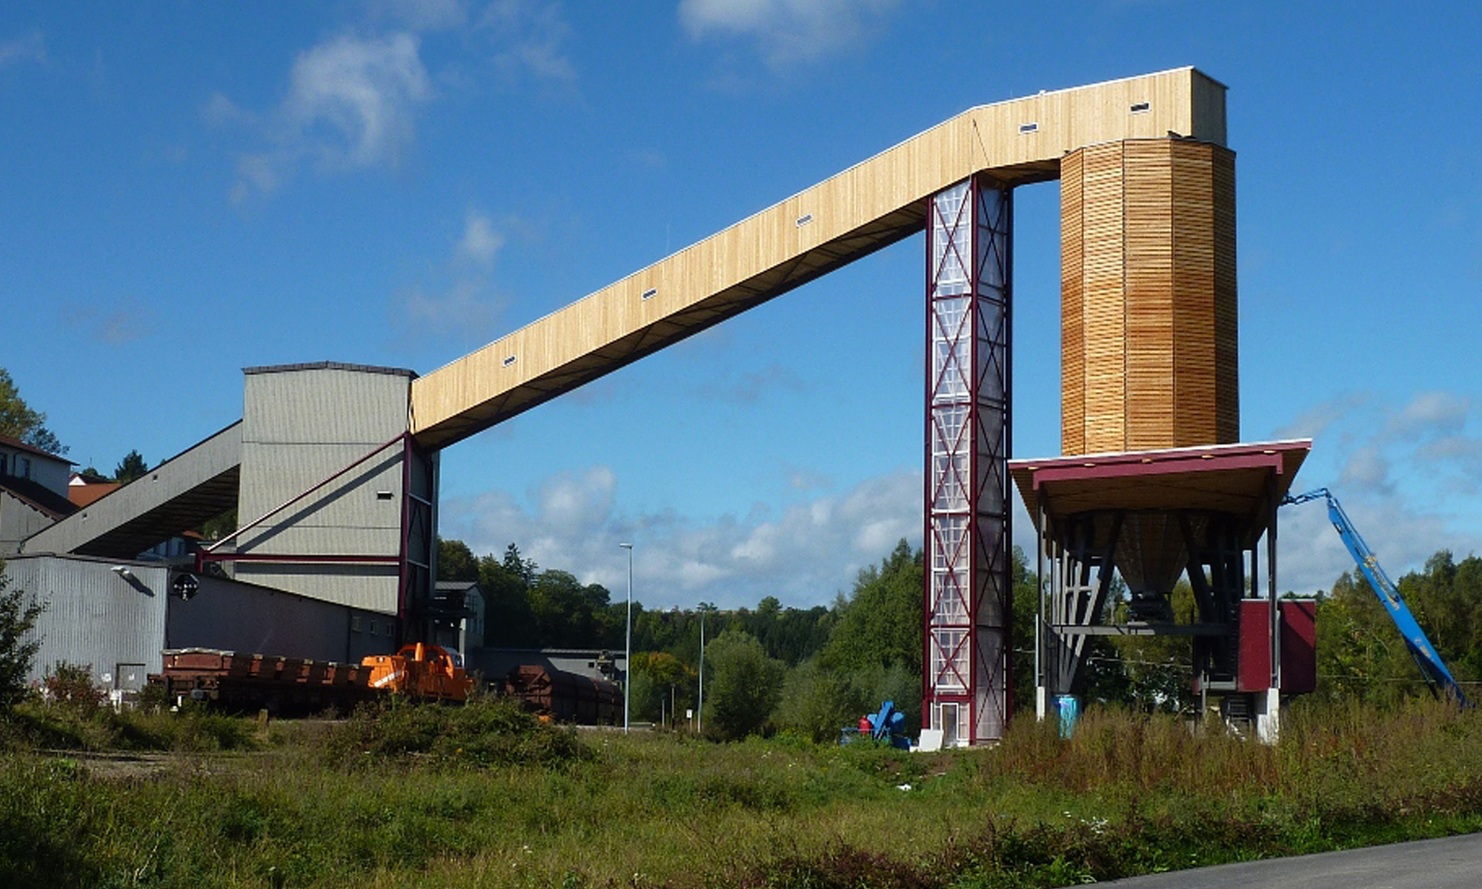 Silo facility with grit silo, loading installation and truss bridge in Haigerloch Germany